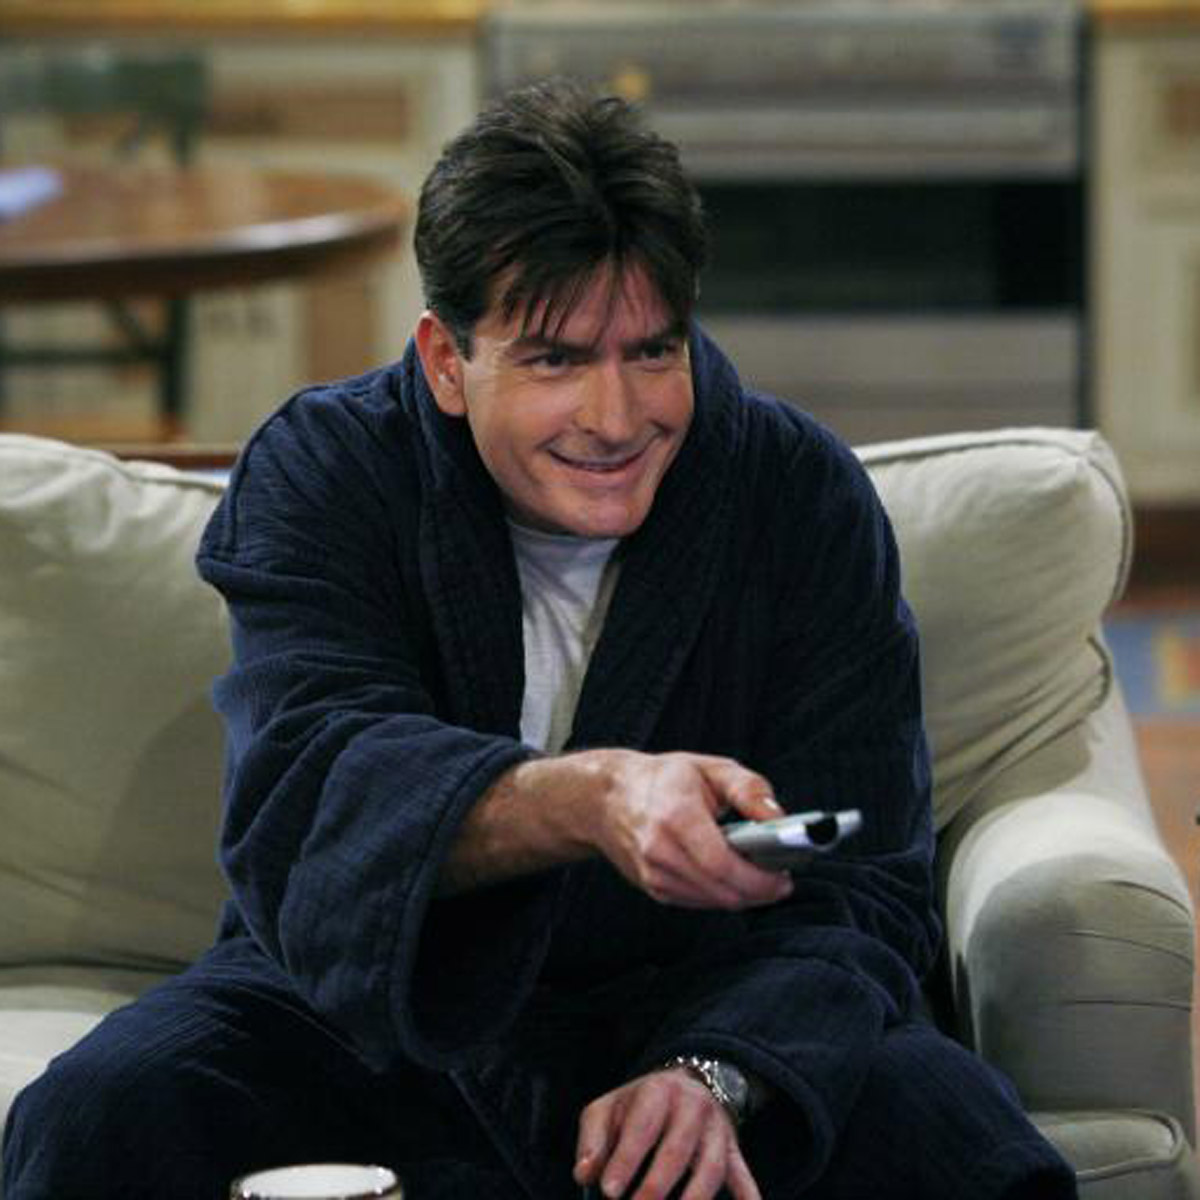 Character exits from TV shows that shocked viewers: Charlie Harper